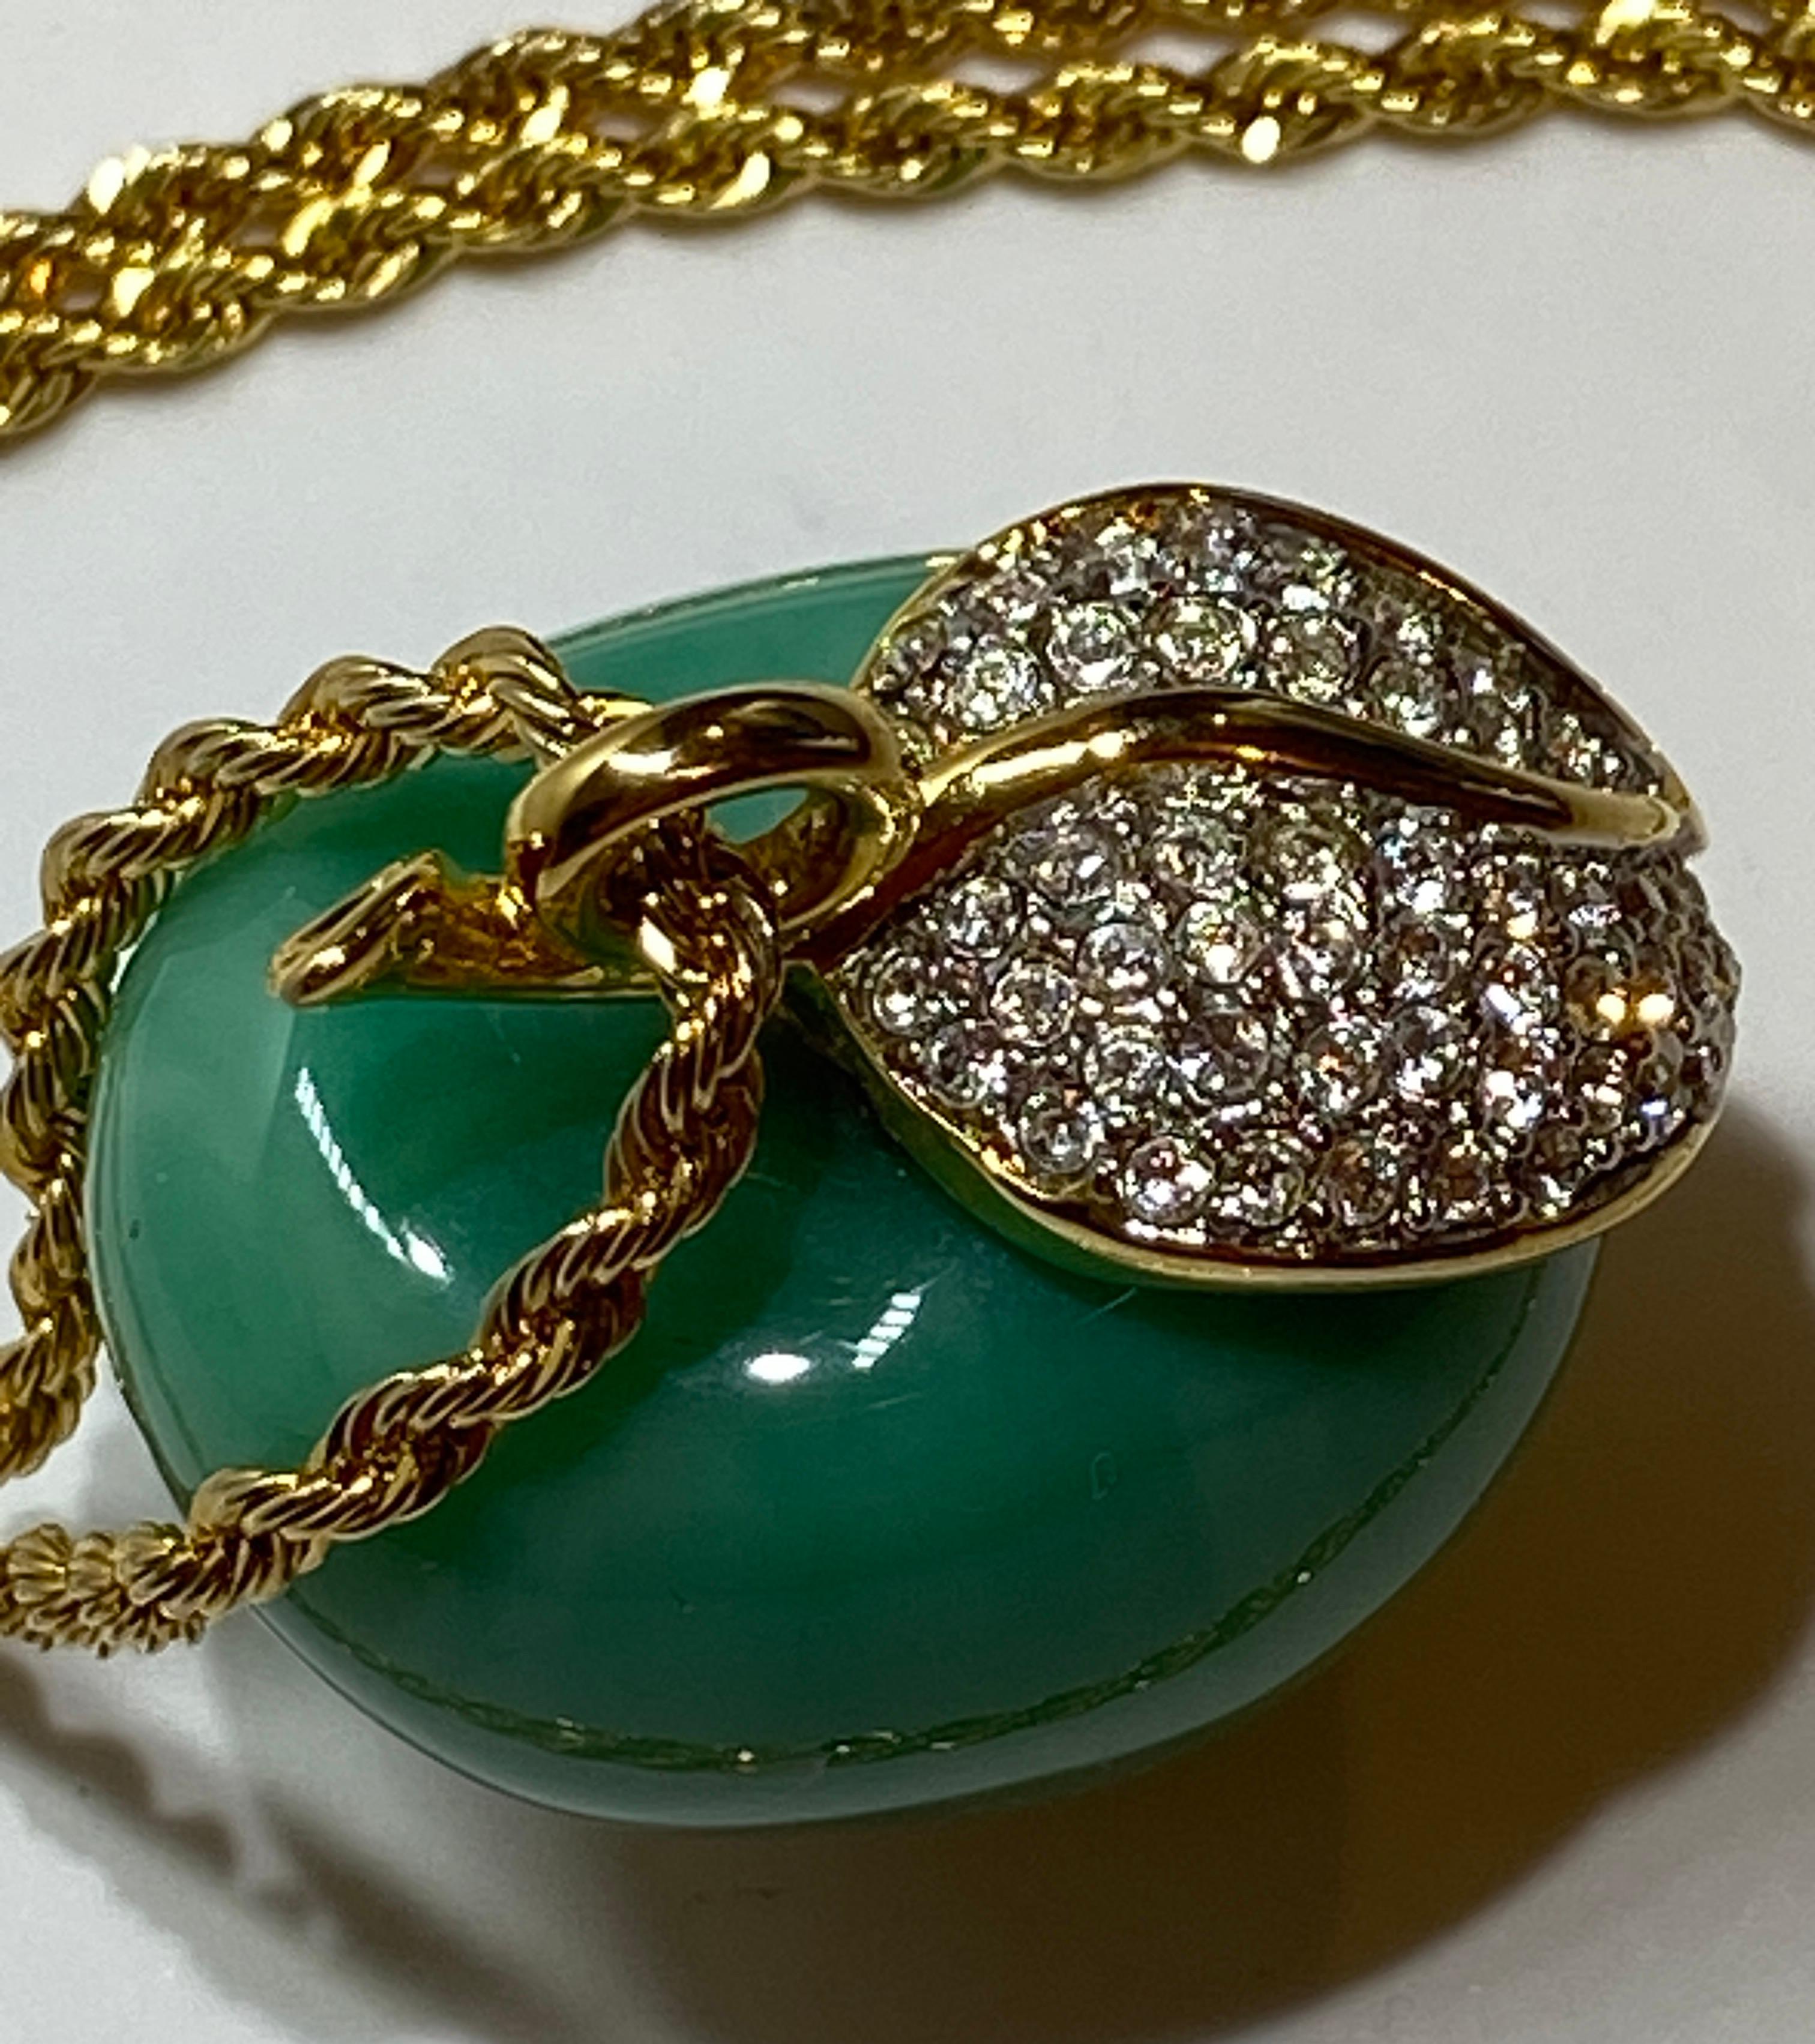 Kenneth Jay Lane Whimsical Rhinestone Jade-Green Lucite Apple Pendant & Necklace In Good Condition For Sale In New York, NY